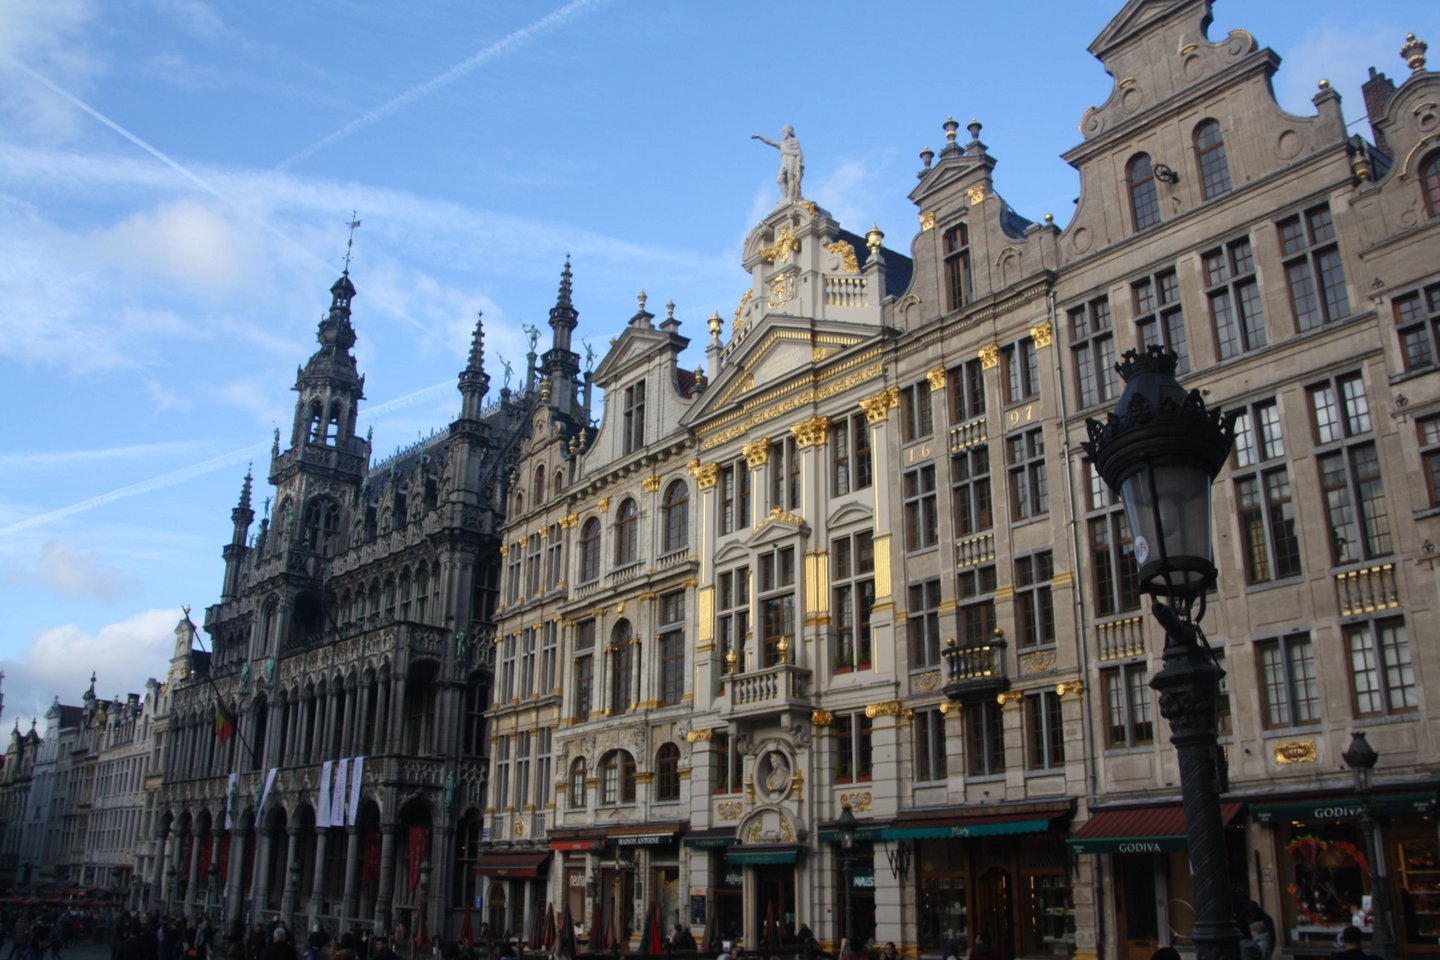 Grote Markt (engl. Grand Place) in Brussels